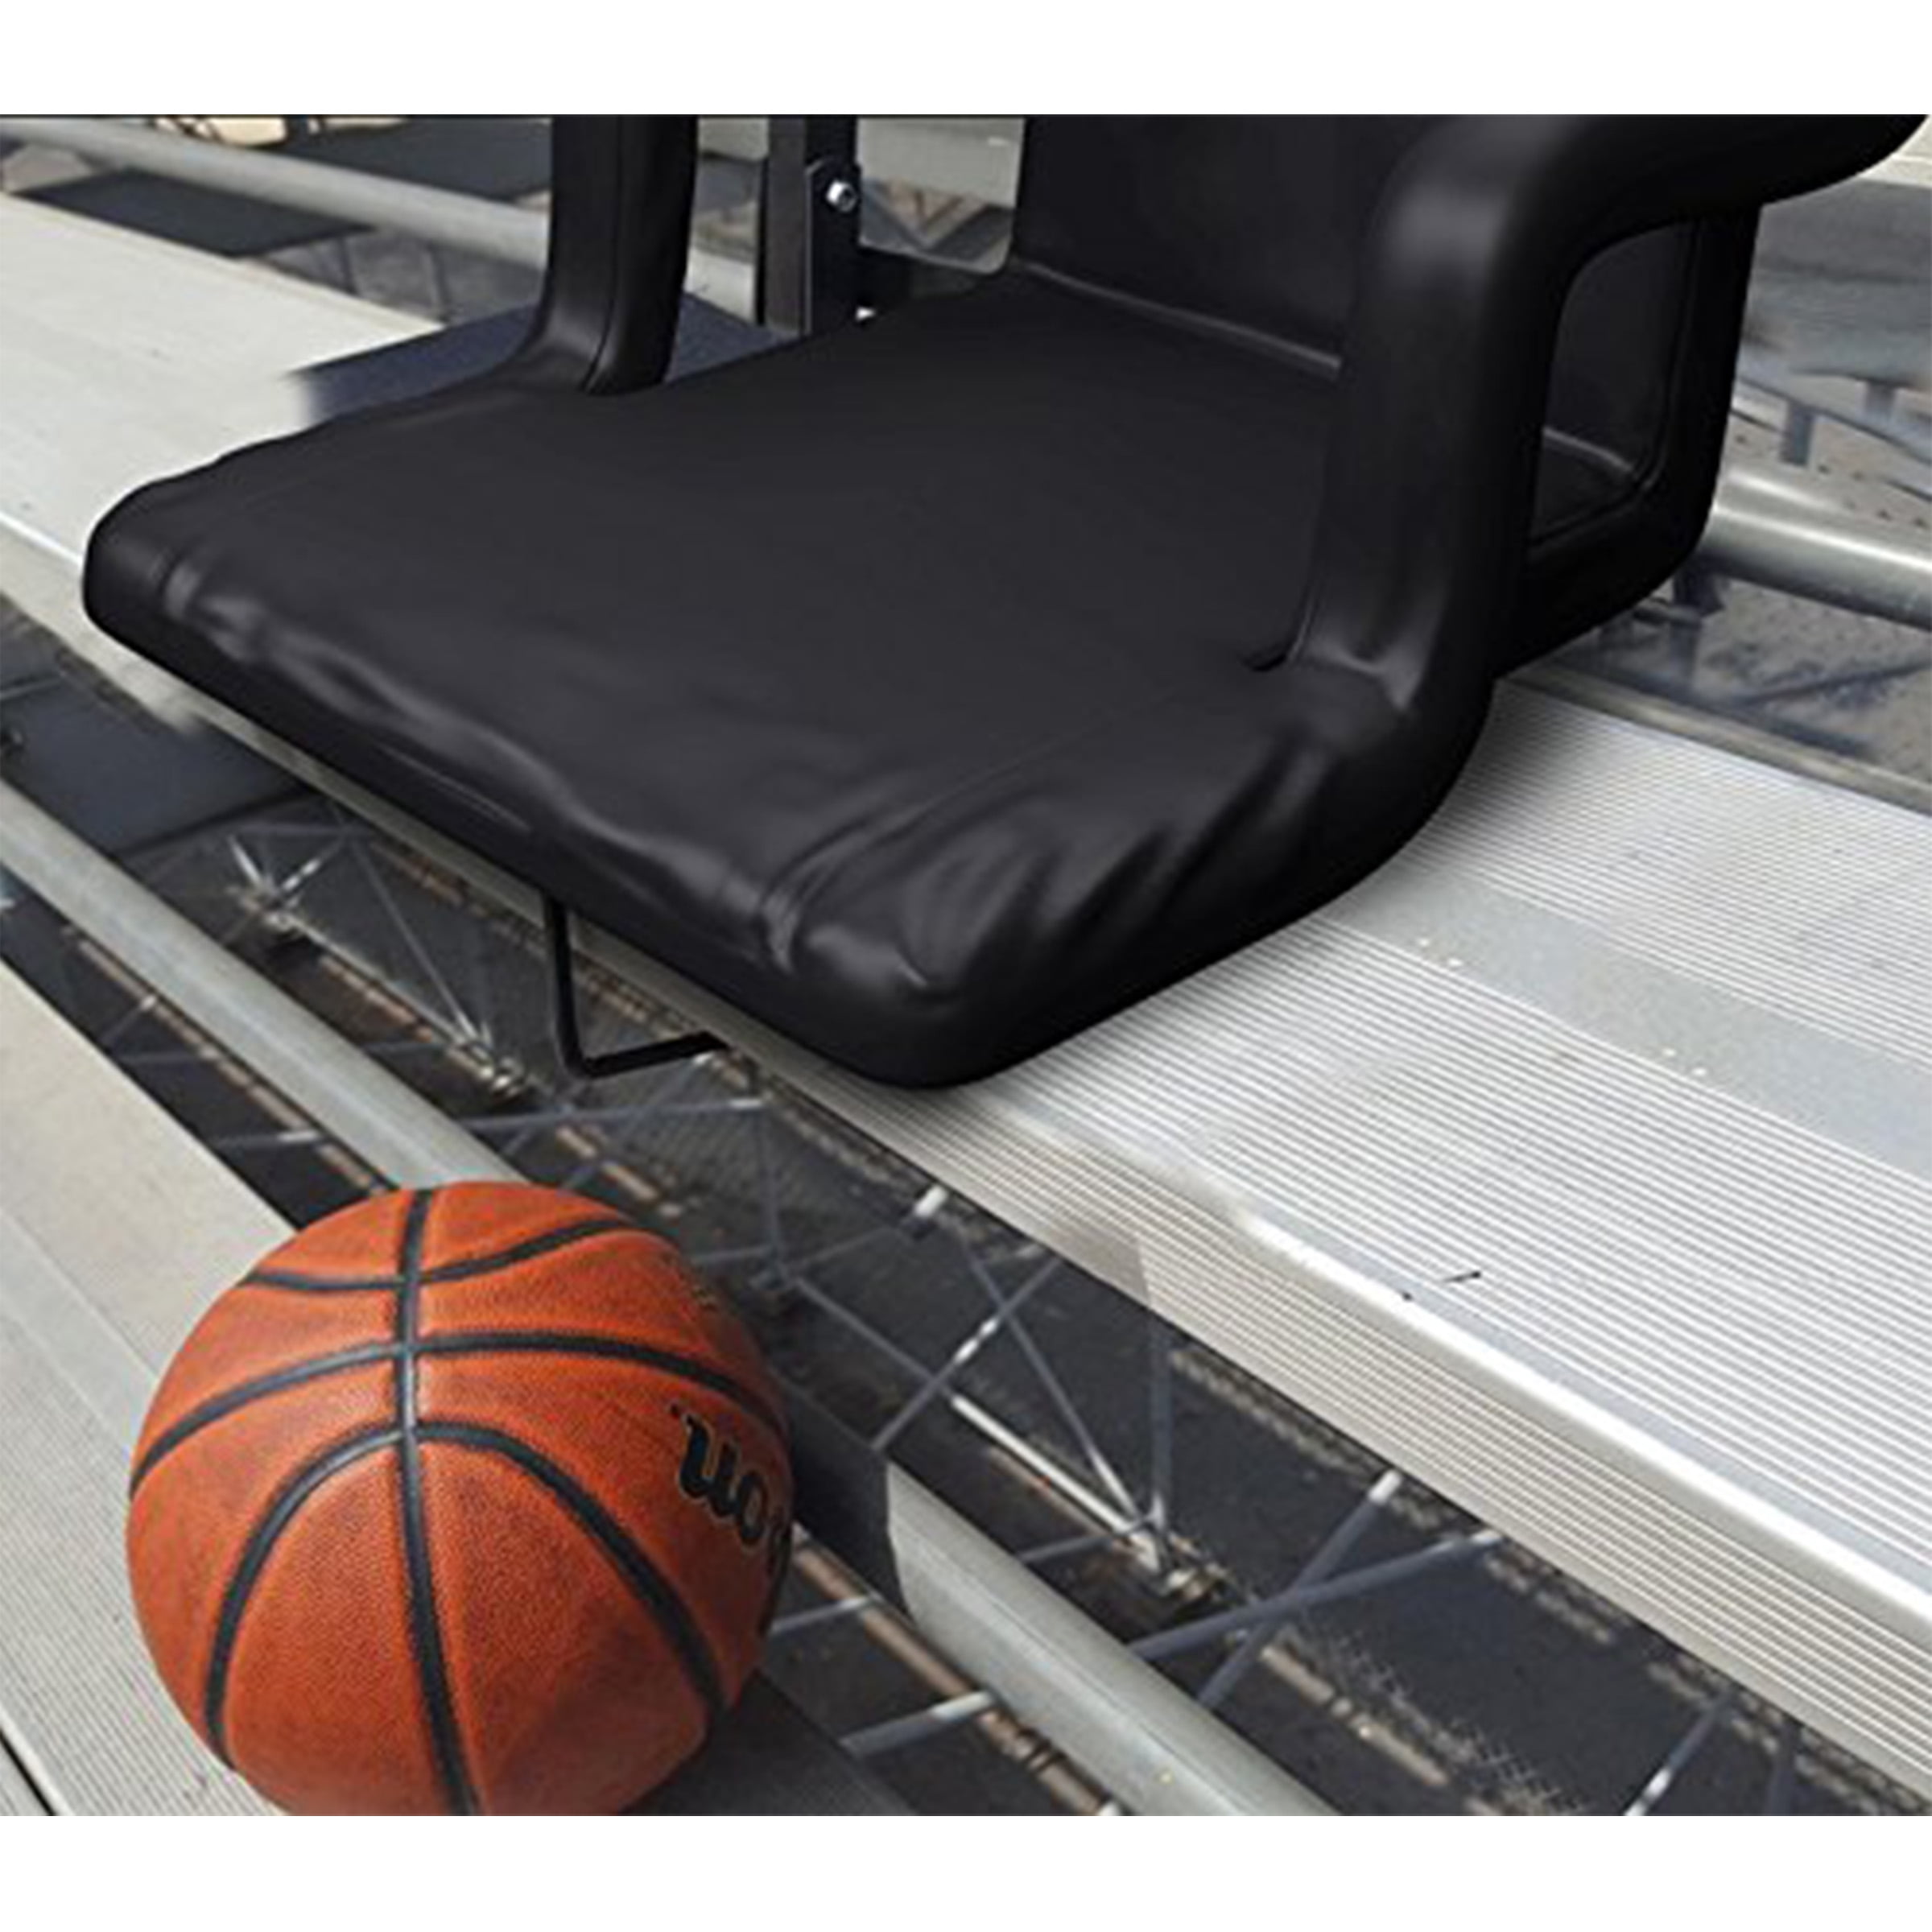 Stadium Seat Chair 2 Pack- Wide Bleacher Cushions with Padded Back Support,  Armrests, 6 Reclining Positions and Portable Carry Straps By Home-Complete  